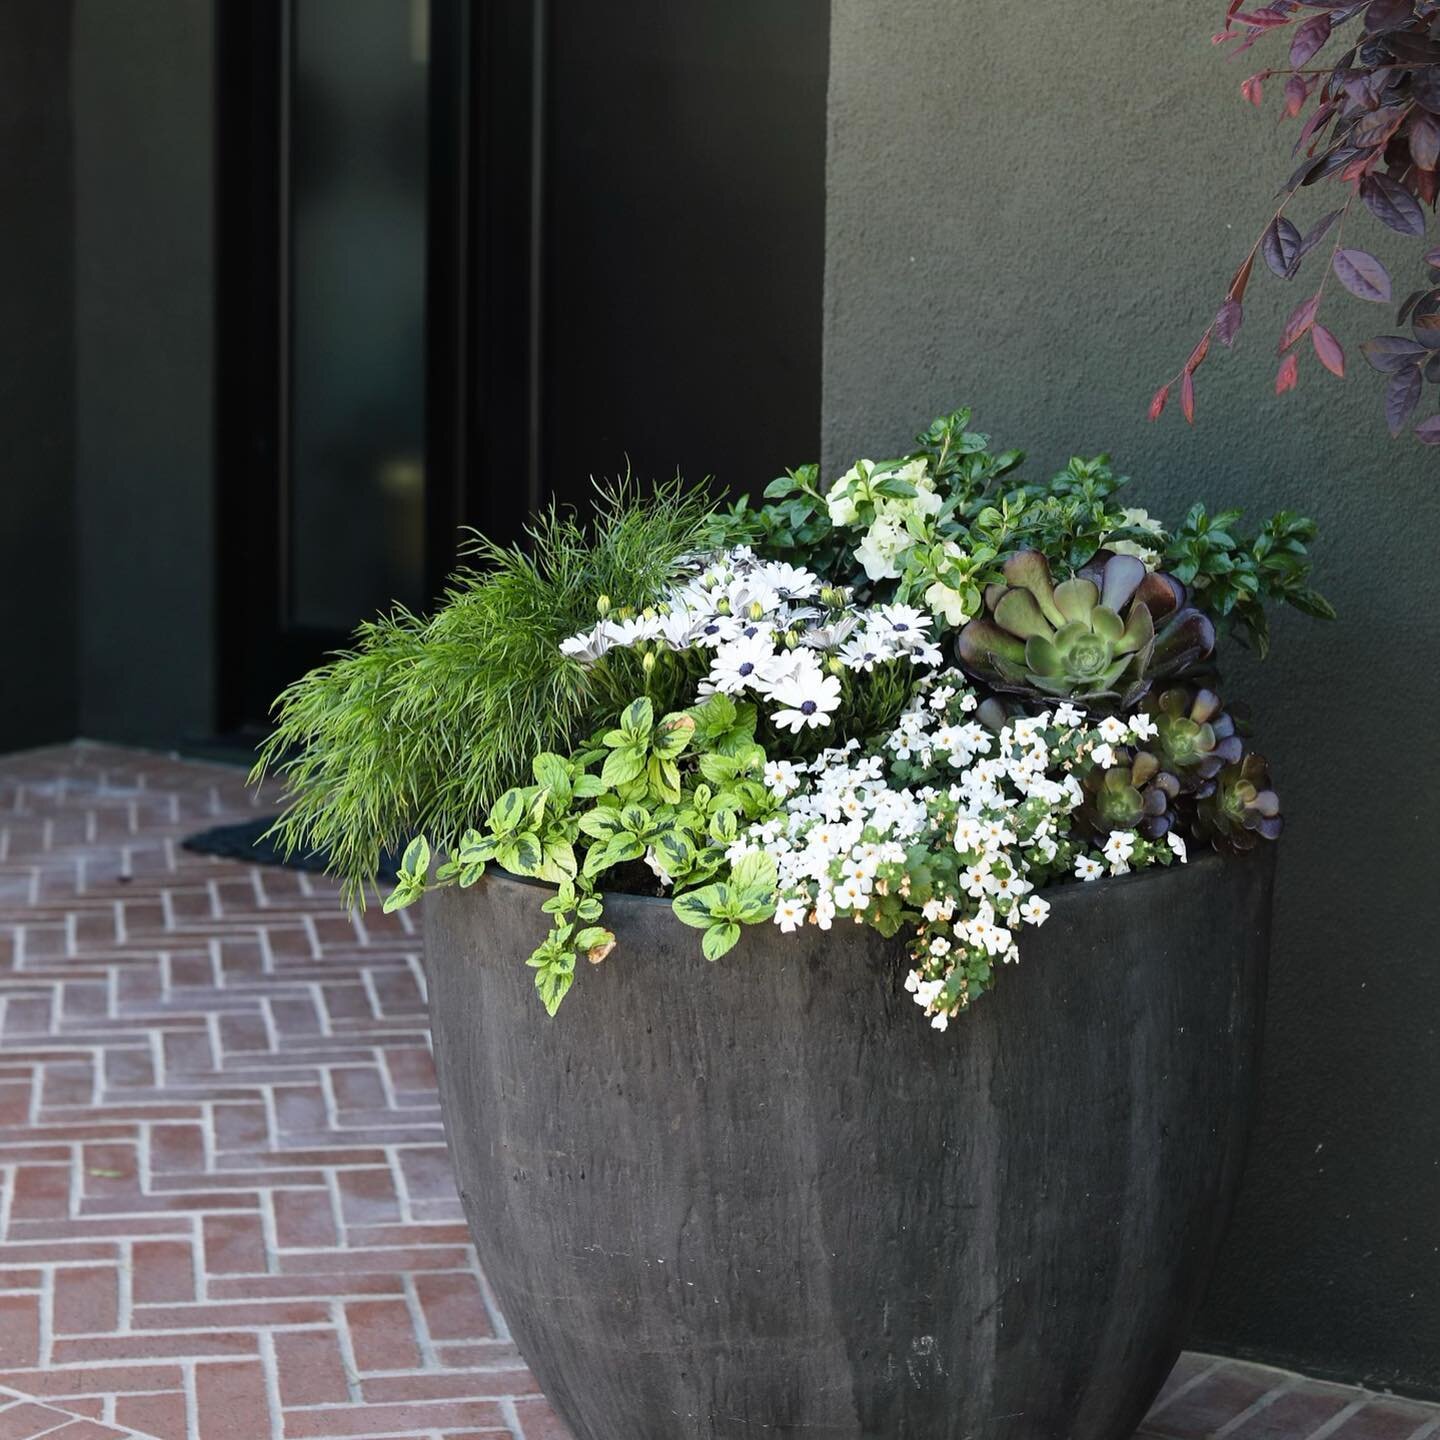 Our annual springtime workshop is here! This Friday, 5/19 we'll be hosting a container gardening workshop with our favorite outdoor annual and perennial flowering plants for your doorstep. Swipe to see some of the beautiful containers arranged and gr